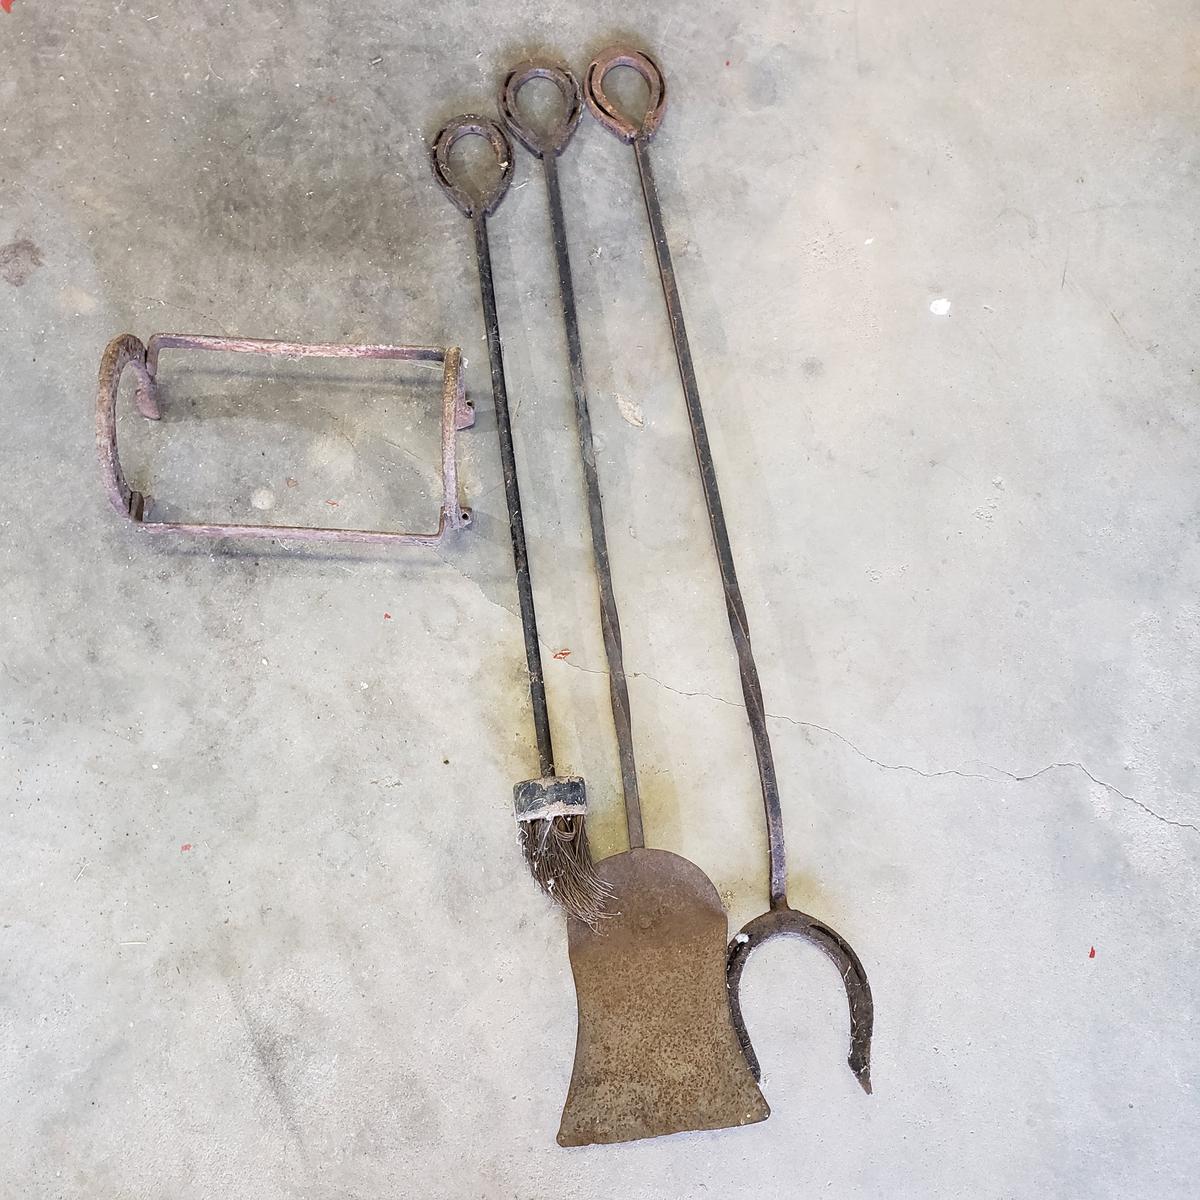 Vintage Horse Shoe Rack and Fireplace Tools with Horseshoe Ends